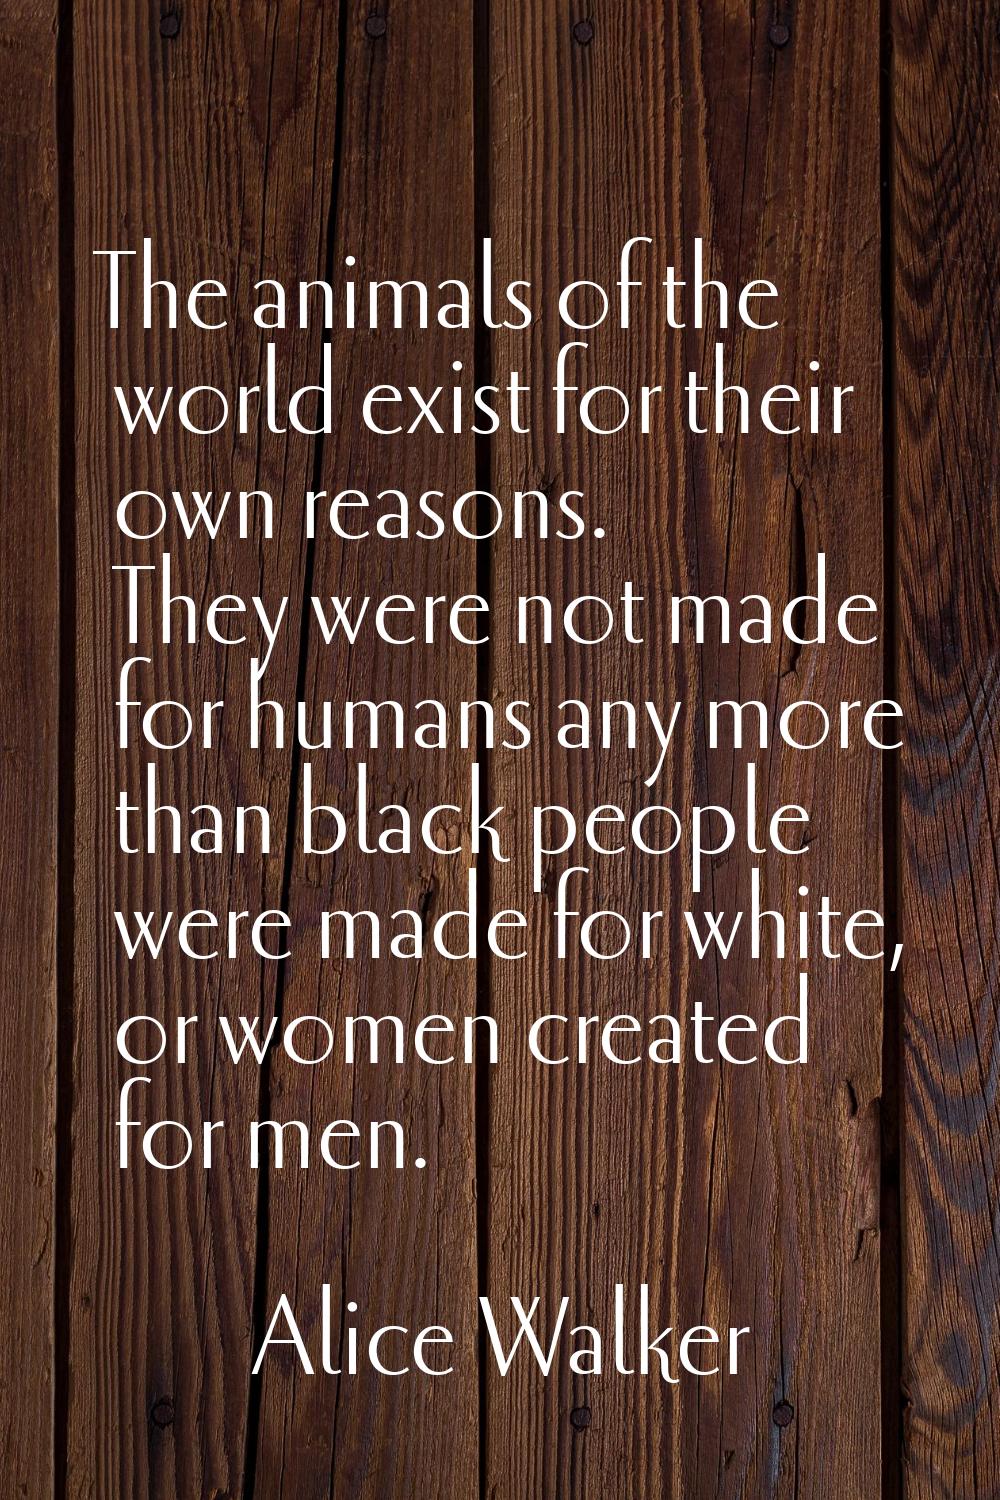 The animals of the world exist for their own reasons. They were not made for humans any more than b